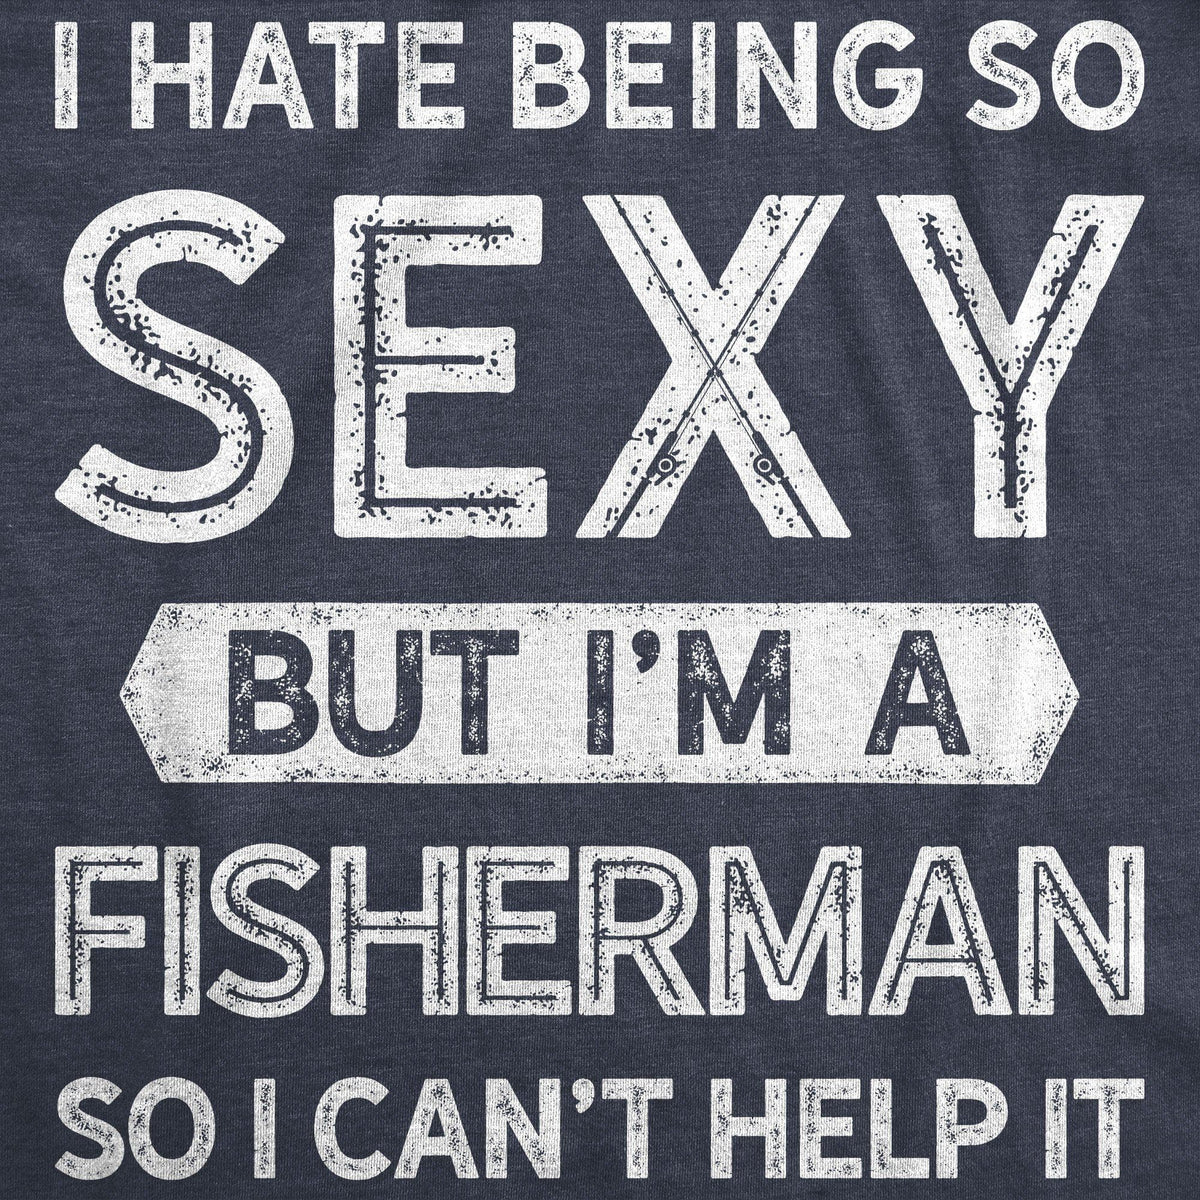 I Hate Being So Sexy But I&#39;m A Fisherman Men&#39;s Tshirt - Crazy Dog T-Shirts